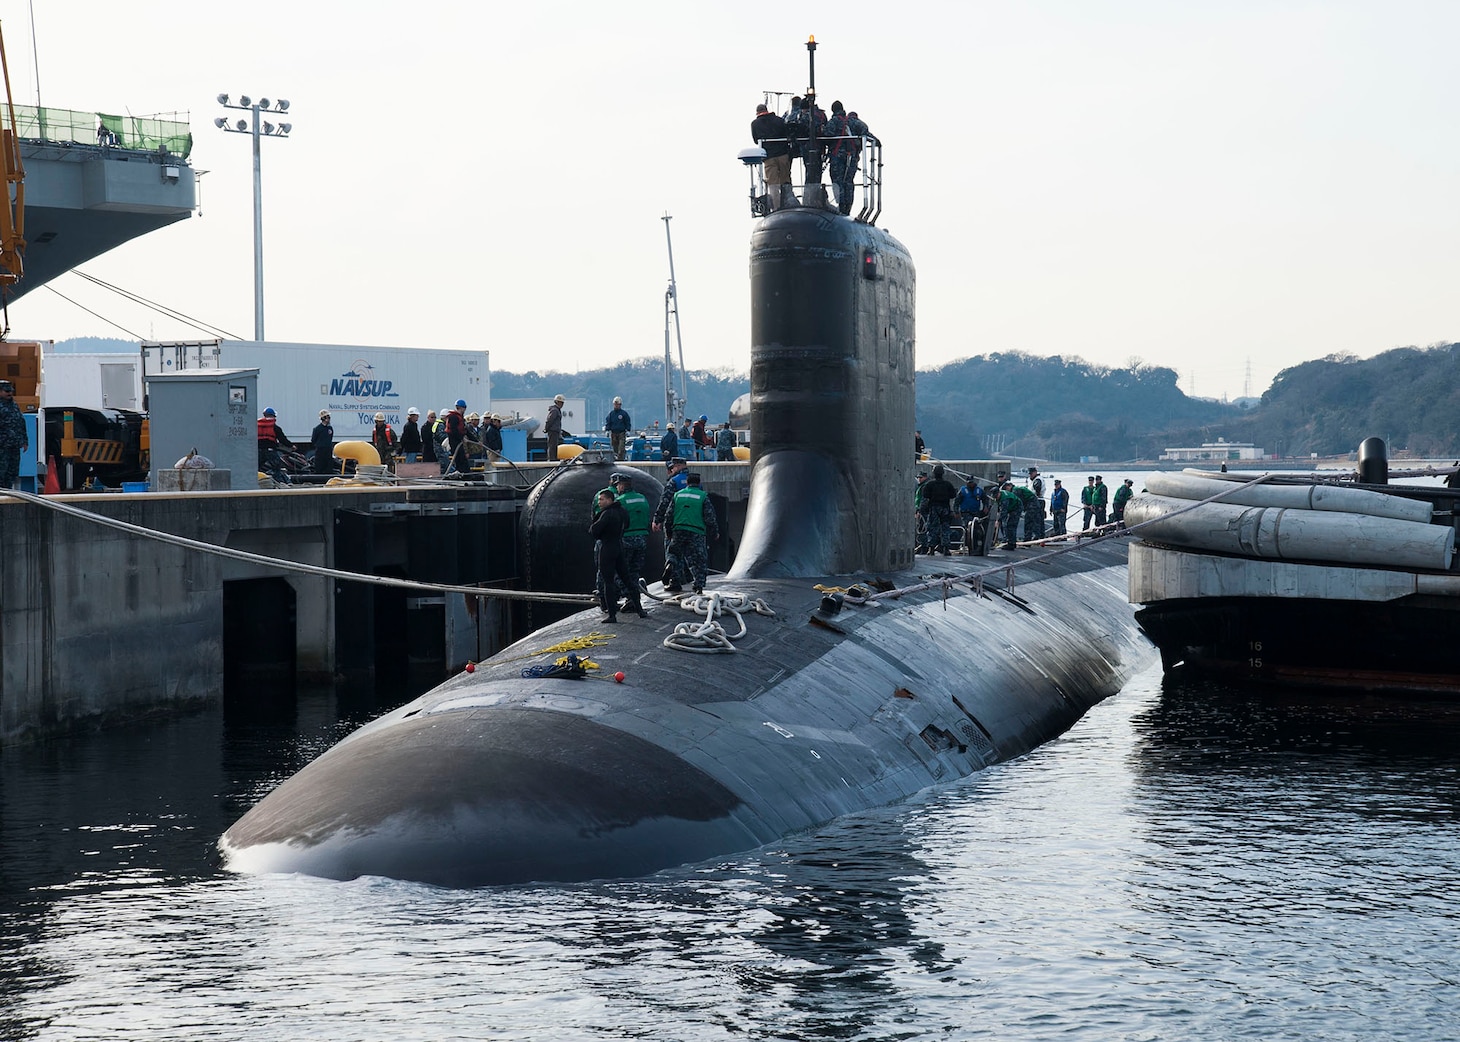 160205-N-ED185-126
TOKYO BAY (Feb. 05, 2015) – Sailors, aboard the Virginia-class attack submarine USS Texas (SSN 775), moor the boat to the pier. Texas is visiting Yokosuka for a port visit. U.S. Navy port visits represent an important opportunity to promote stability and security in the Indo-Asia-Pacific region, demonstrate commitment to regional partners and foster growing relationships. (U.S. Navy photo by Mass Communication Specialist 2nd Class Brian G. Reynolds/Released)
